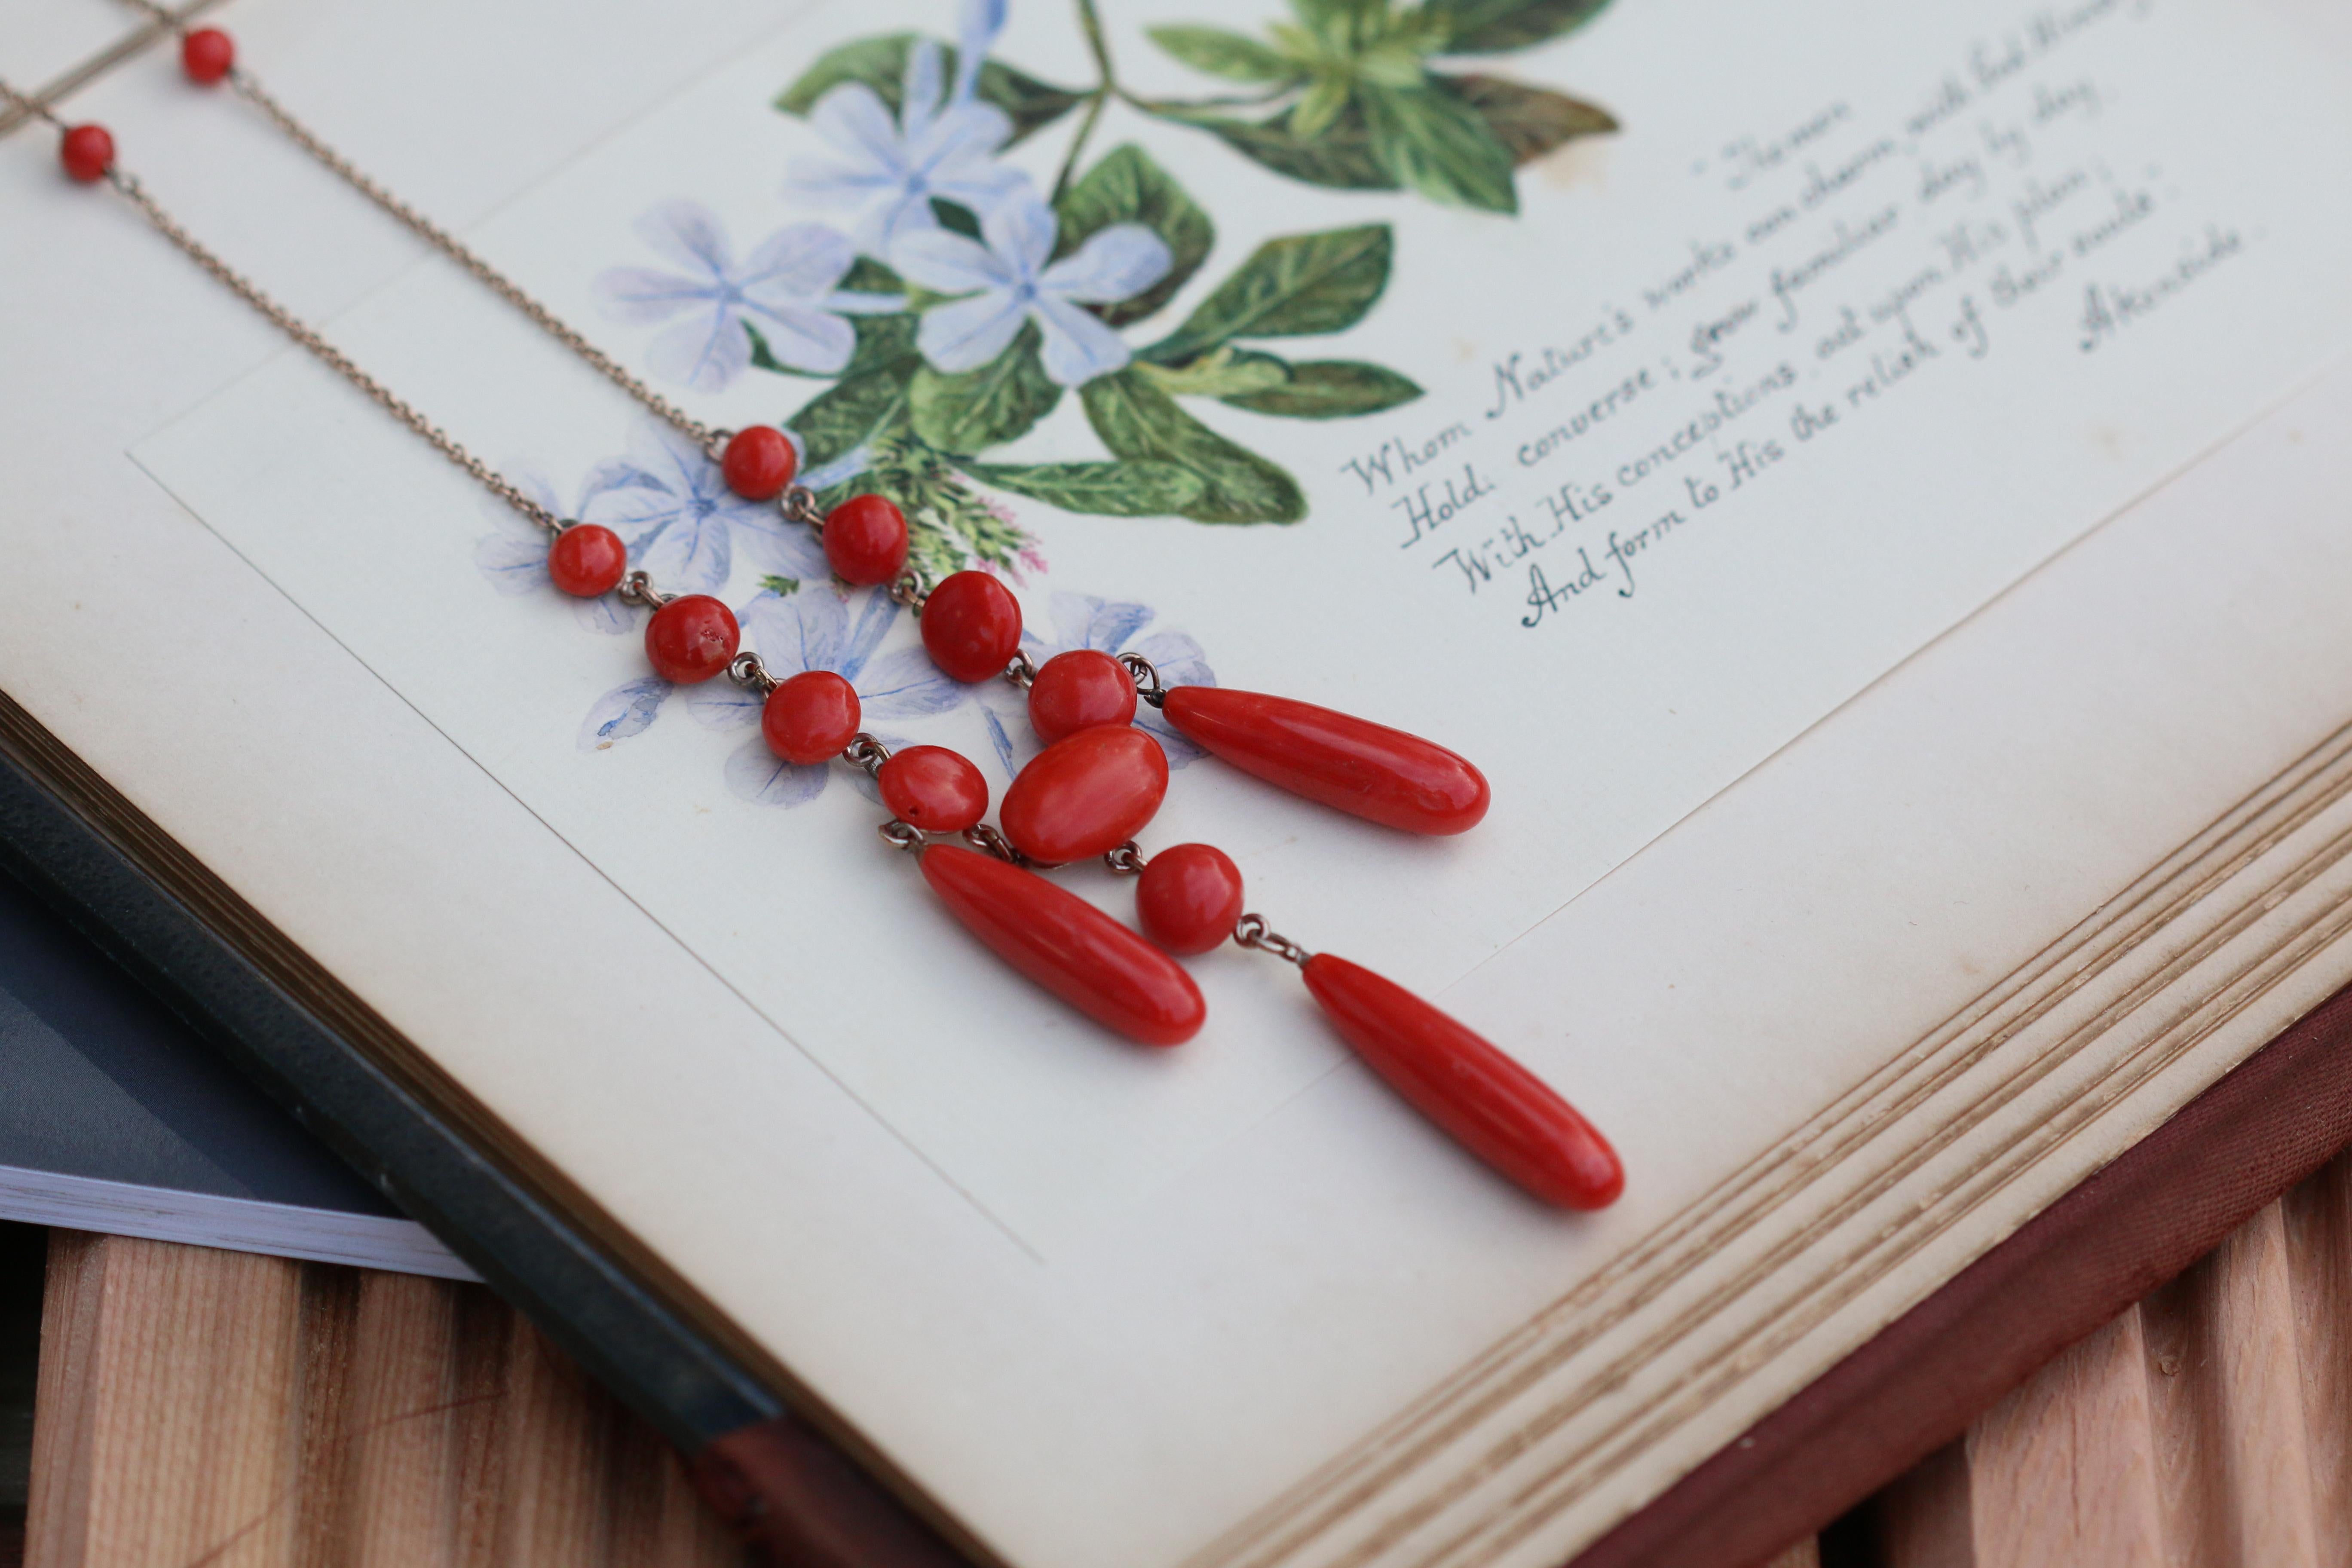 This is a classic design in coral jewellery. The focus of this necklace is the three elongated teardrops that hang beautifully below the chain. In the very centre of the necklace is an oval-shaped piece of coral, either side of this are graduated